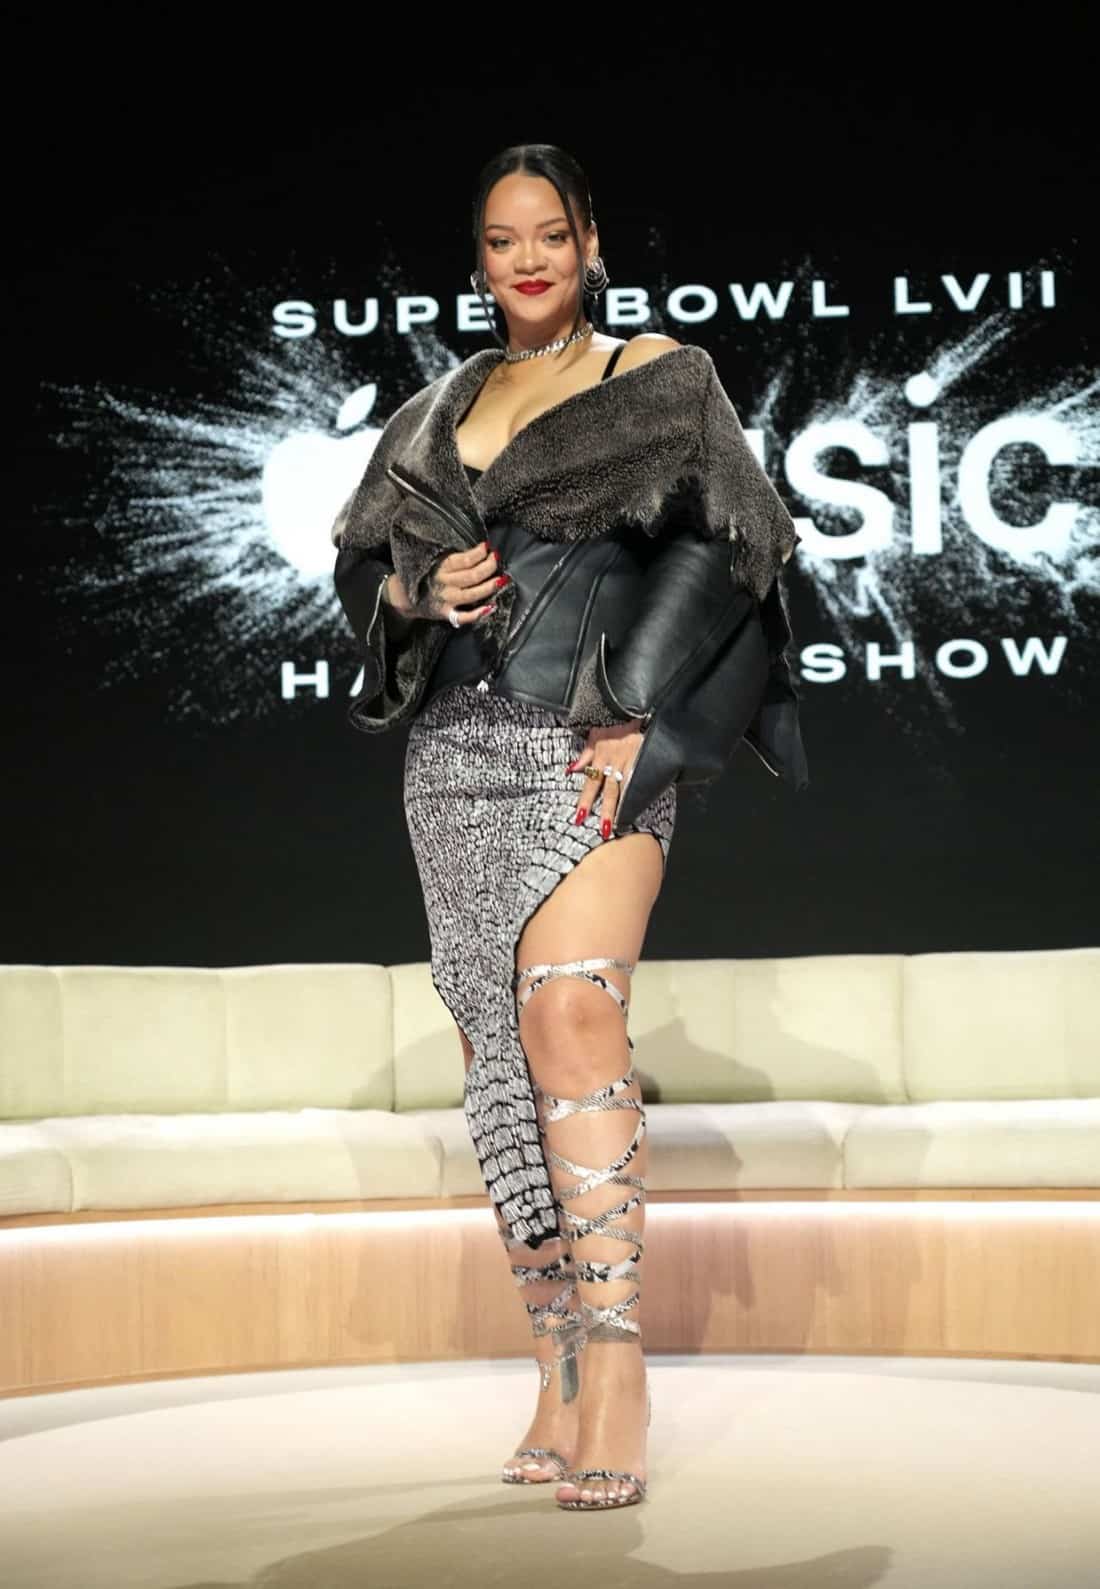 Rihanna Wows All with Fashionable Look at Super Bowl LVII Press Conference